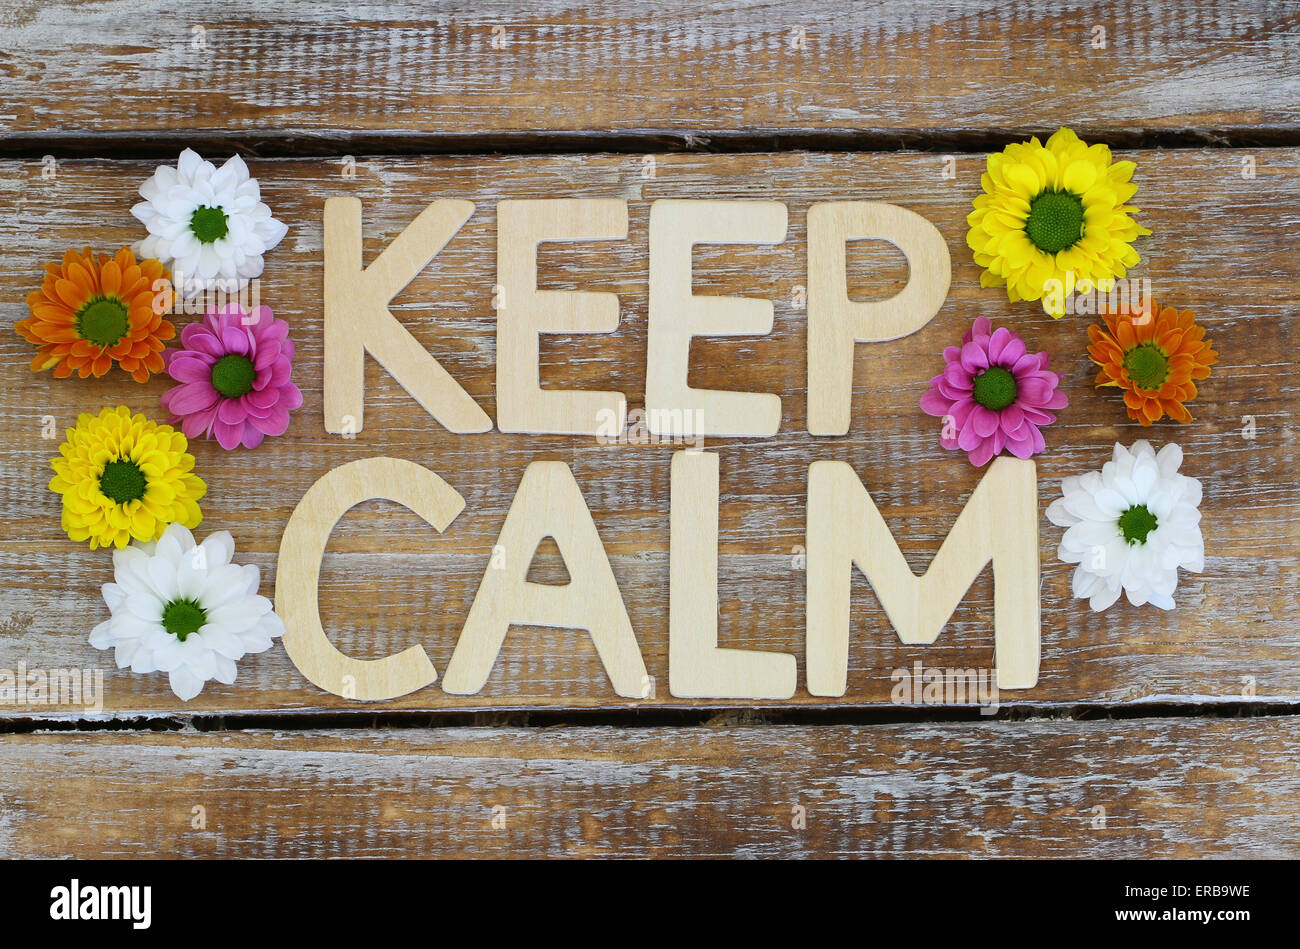 Keep calm written with wooden letters and Santini flowers Stock Photo